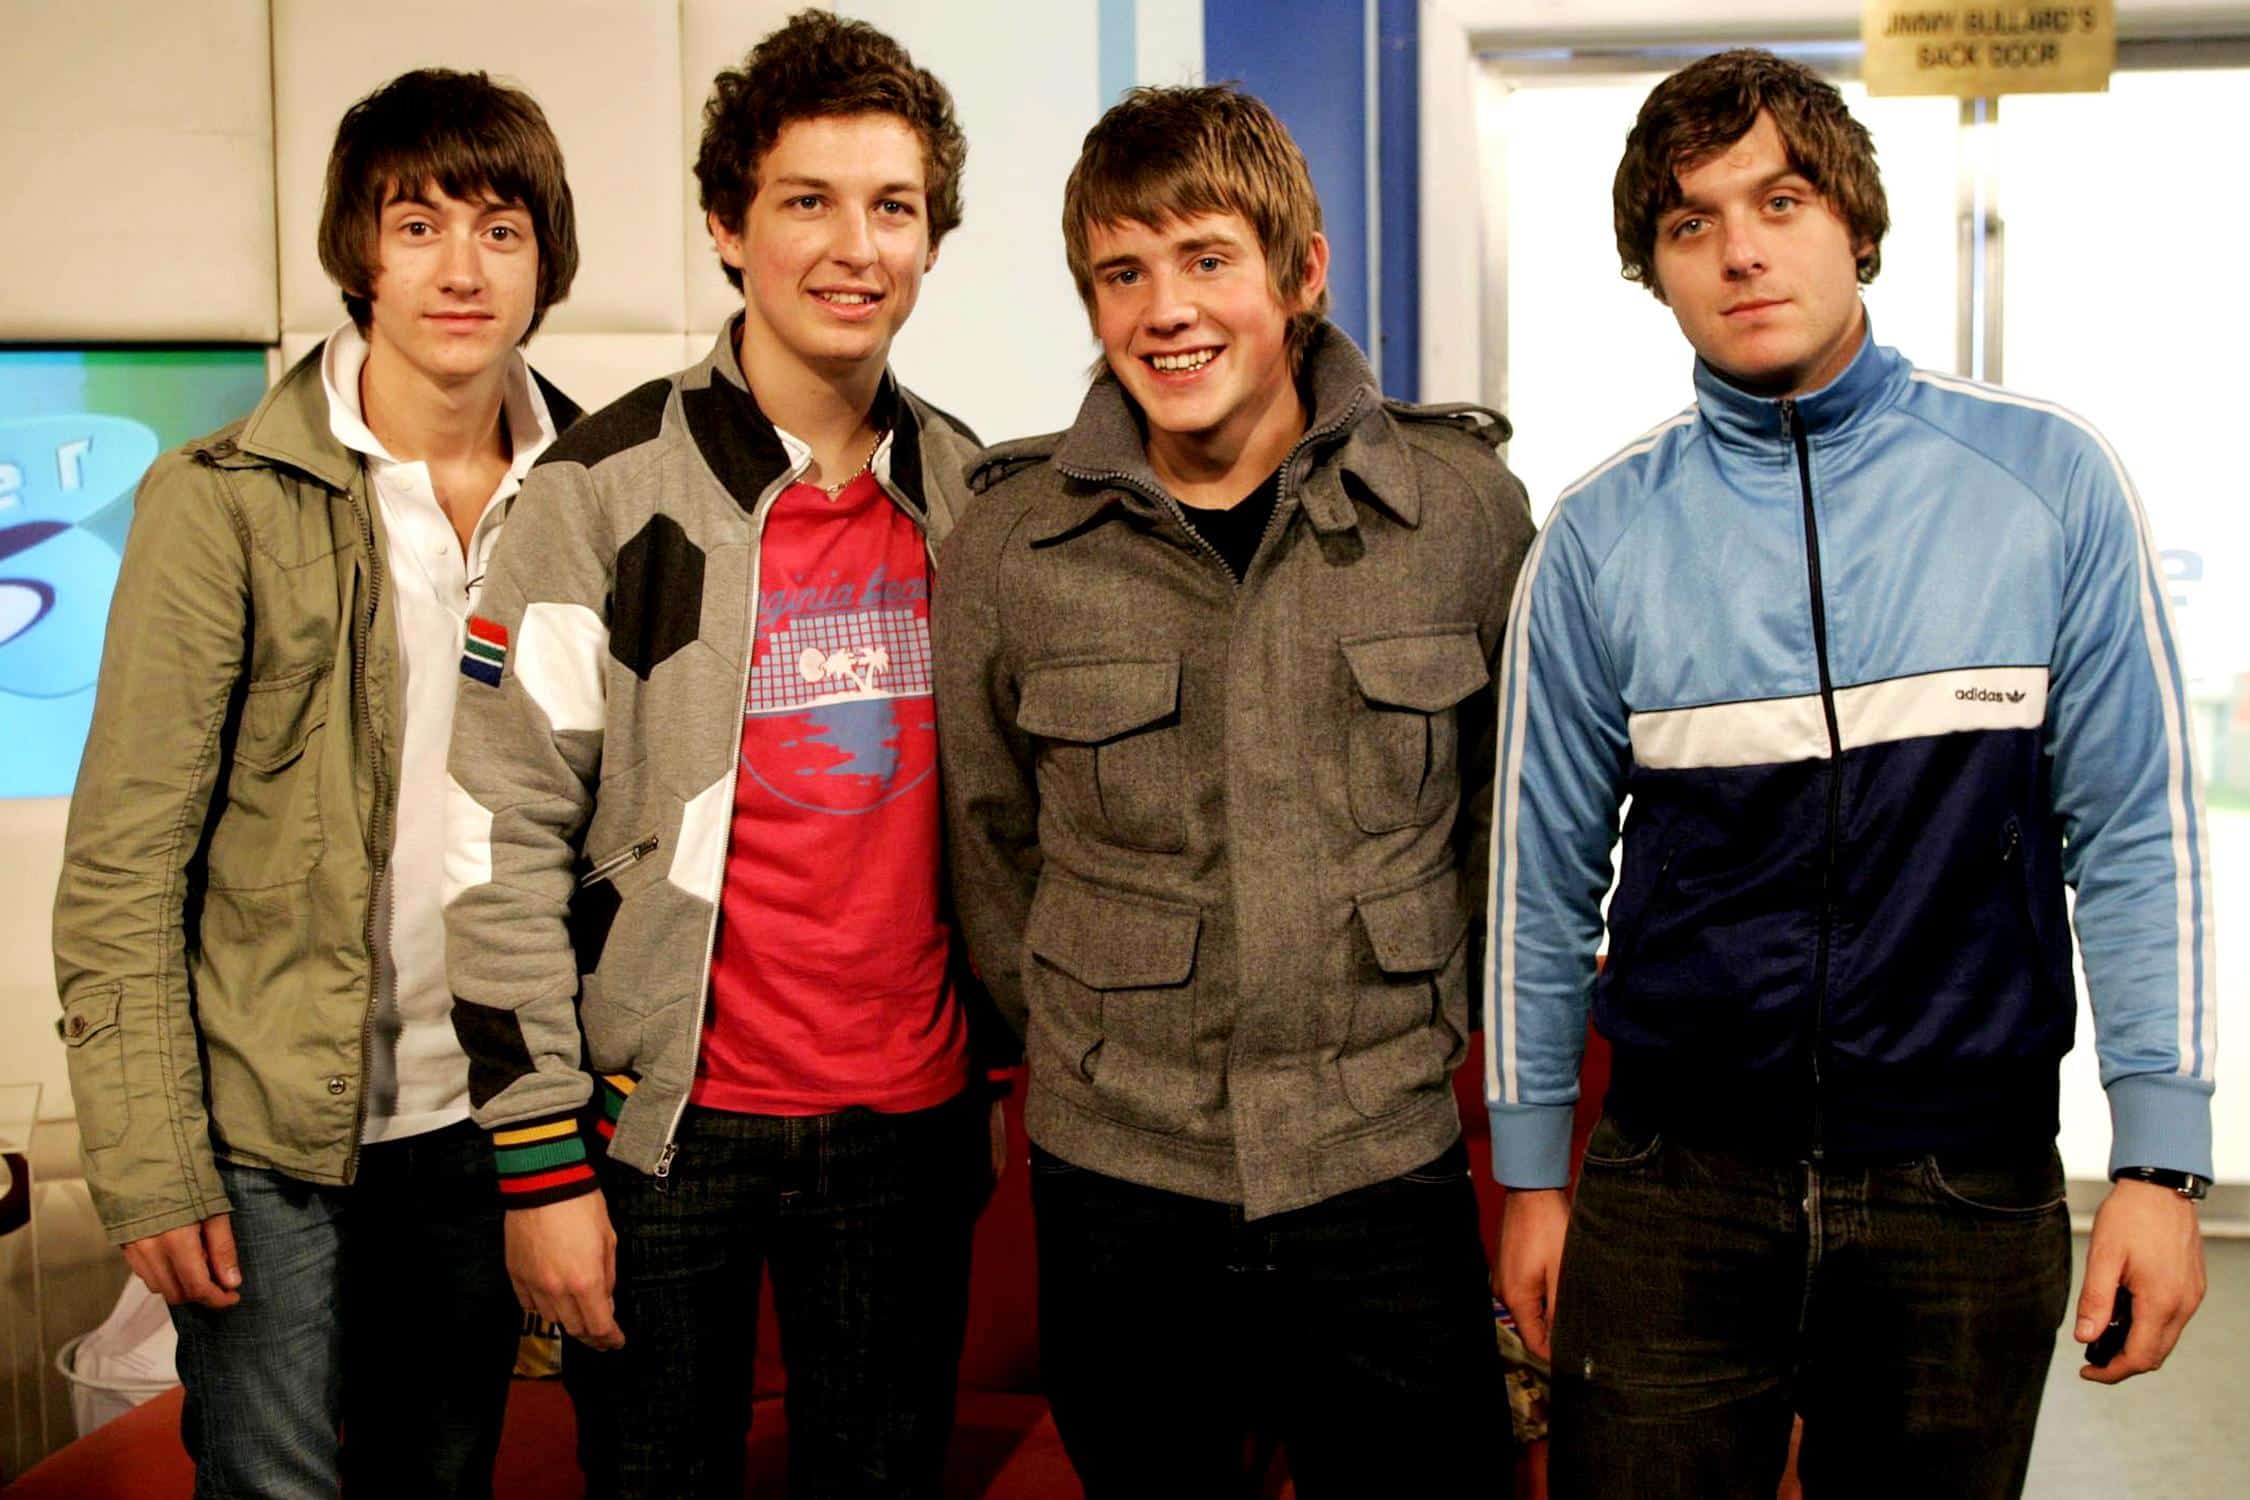 Rock band, Arctic Monkeys, during the early days (Credits: The Times)